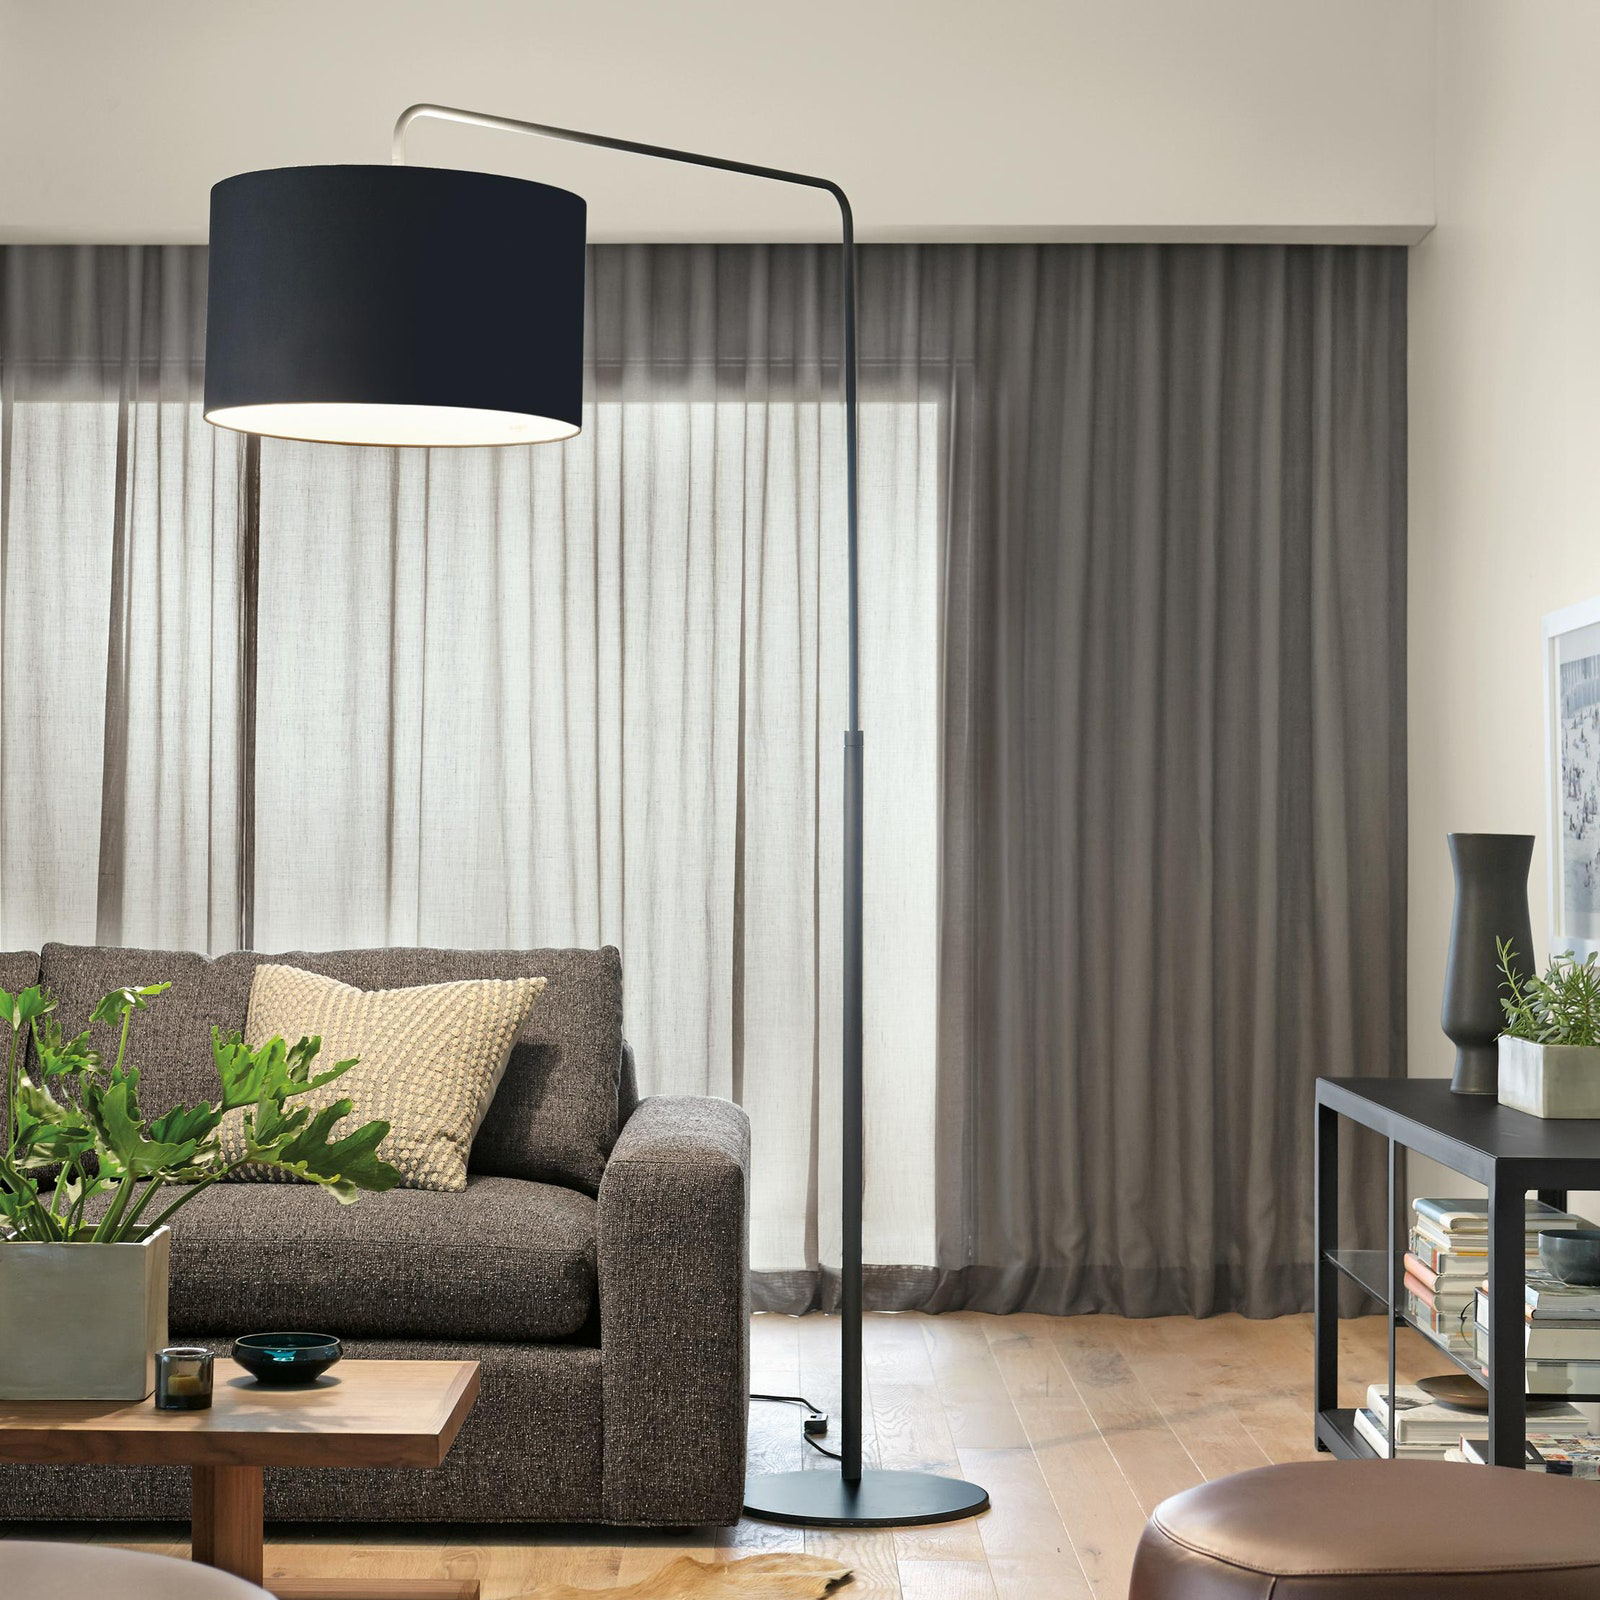 Experience Illumination like Never Before with the Roattino Floor Lamp: A Breakthrough in Modern Lighting Technology